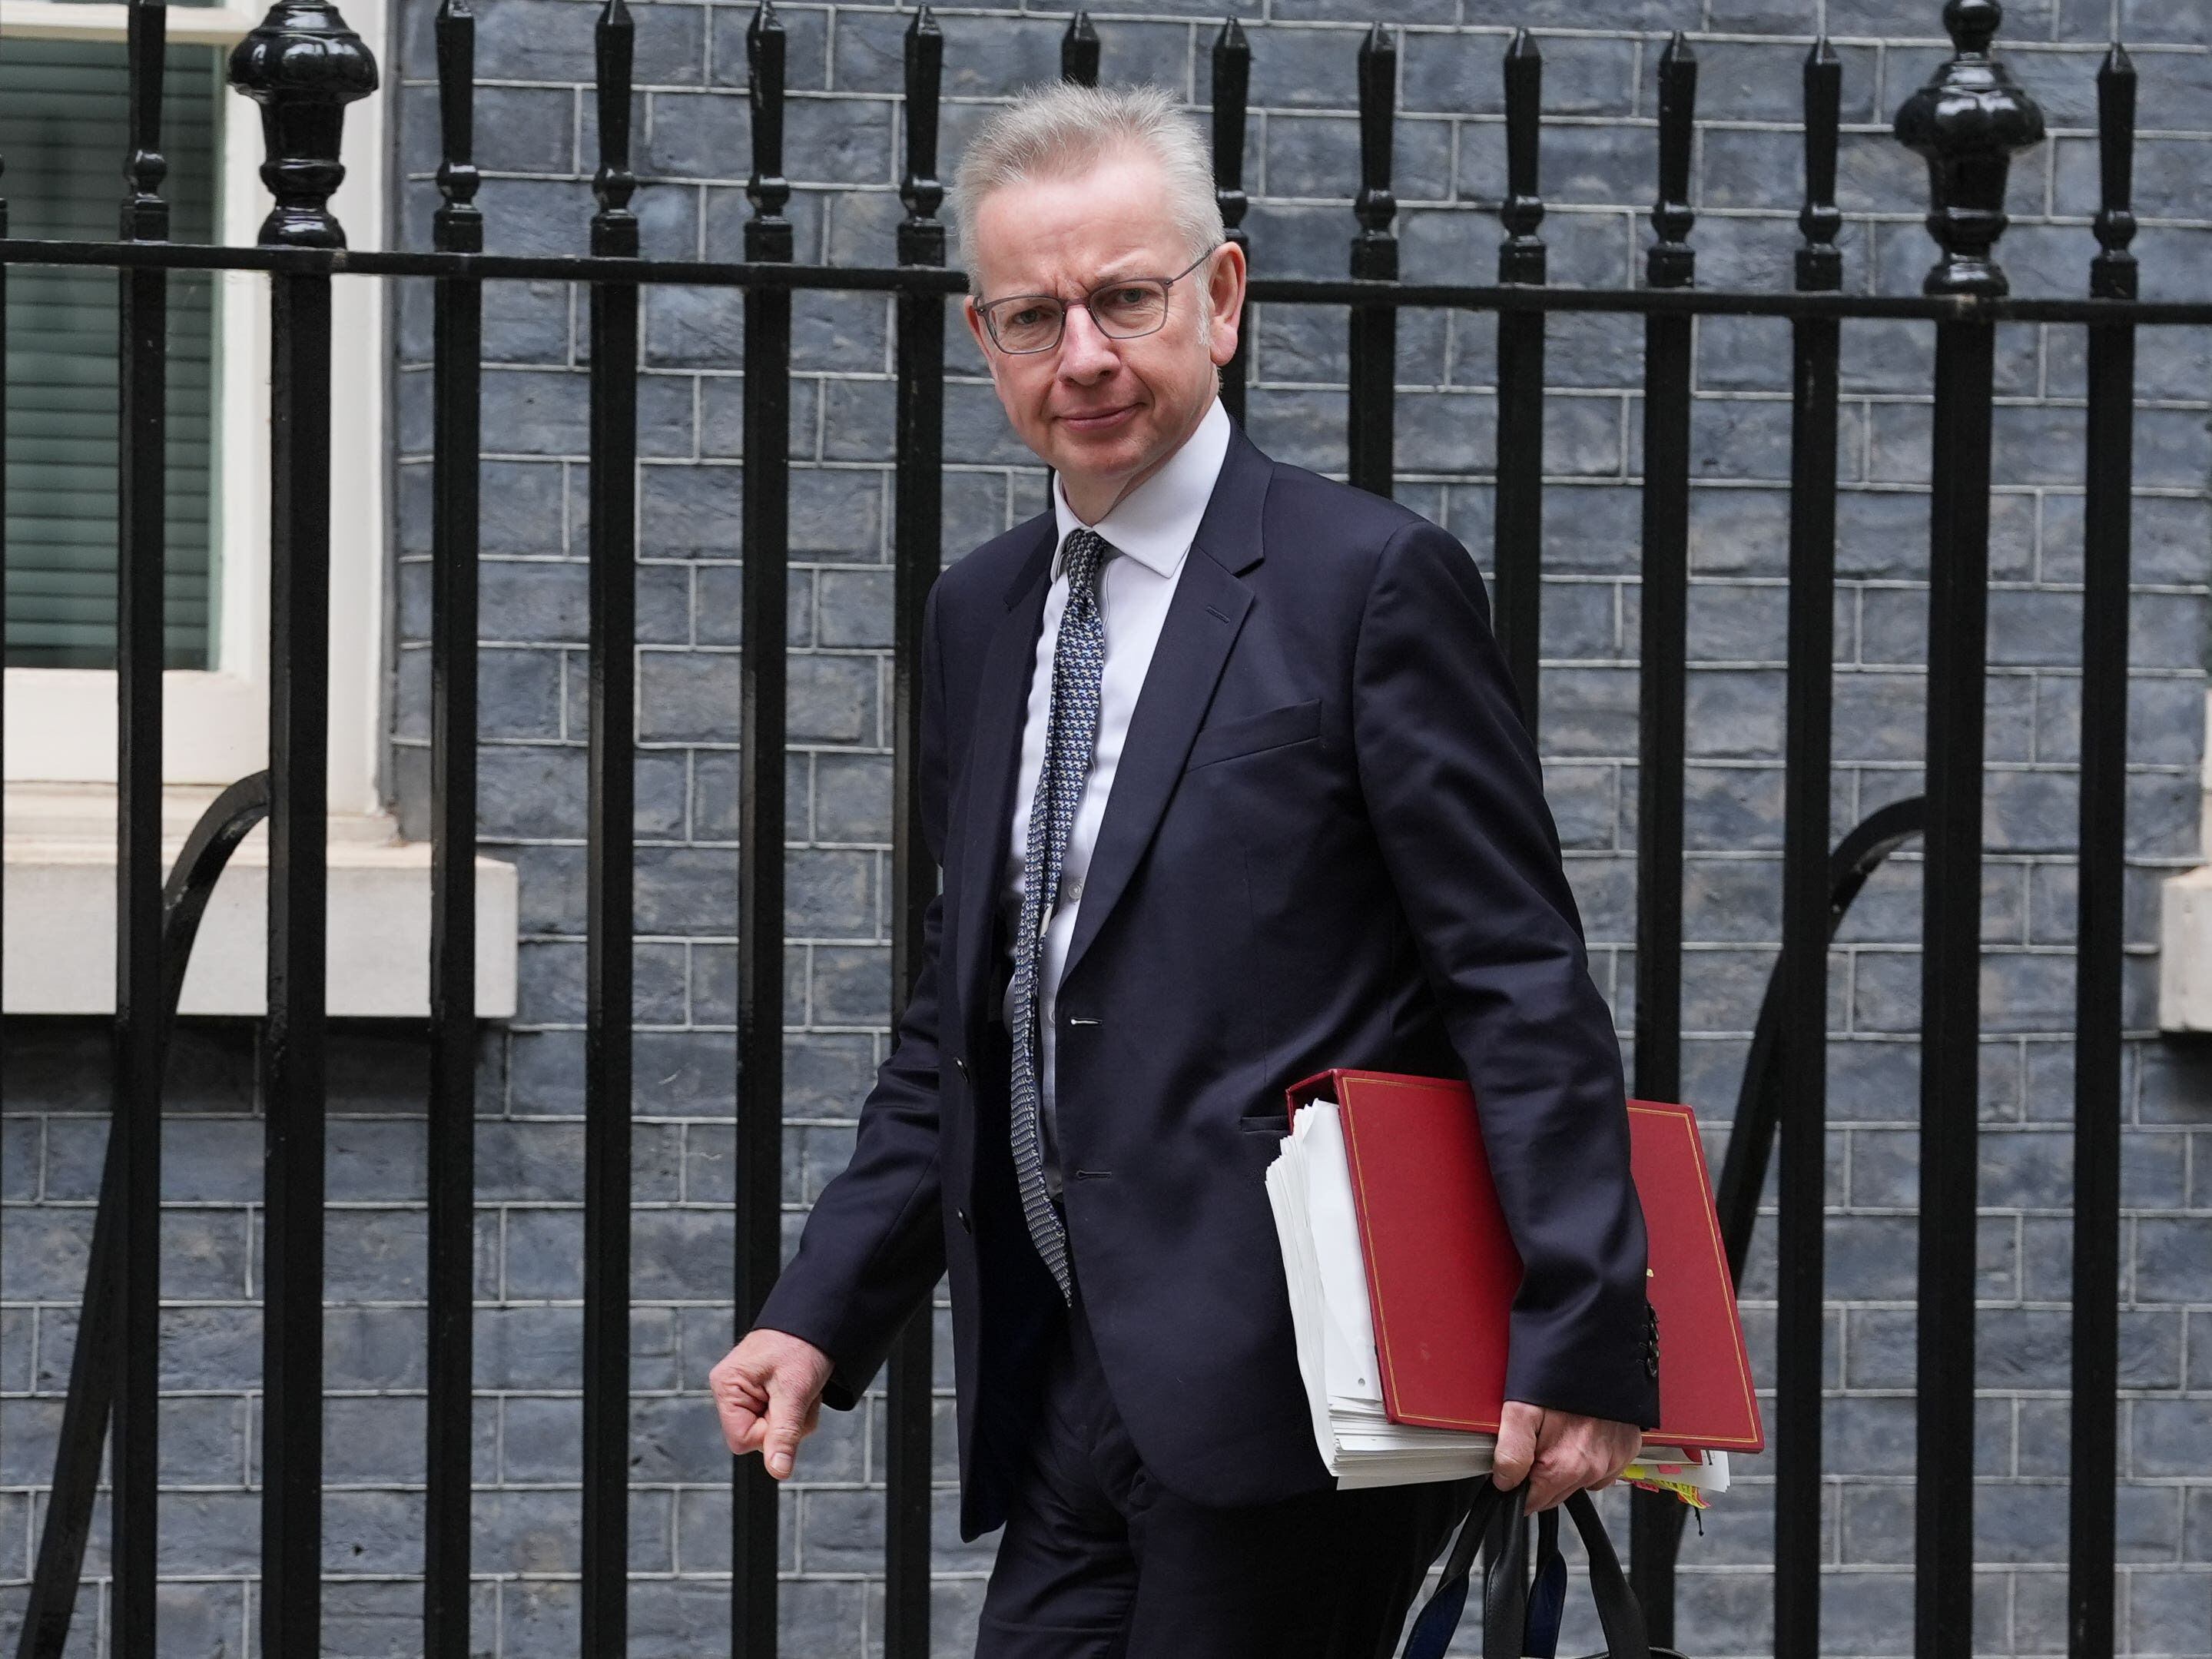 Veteran minister Michael Gove becomes latest high-profile Tory to stand down